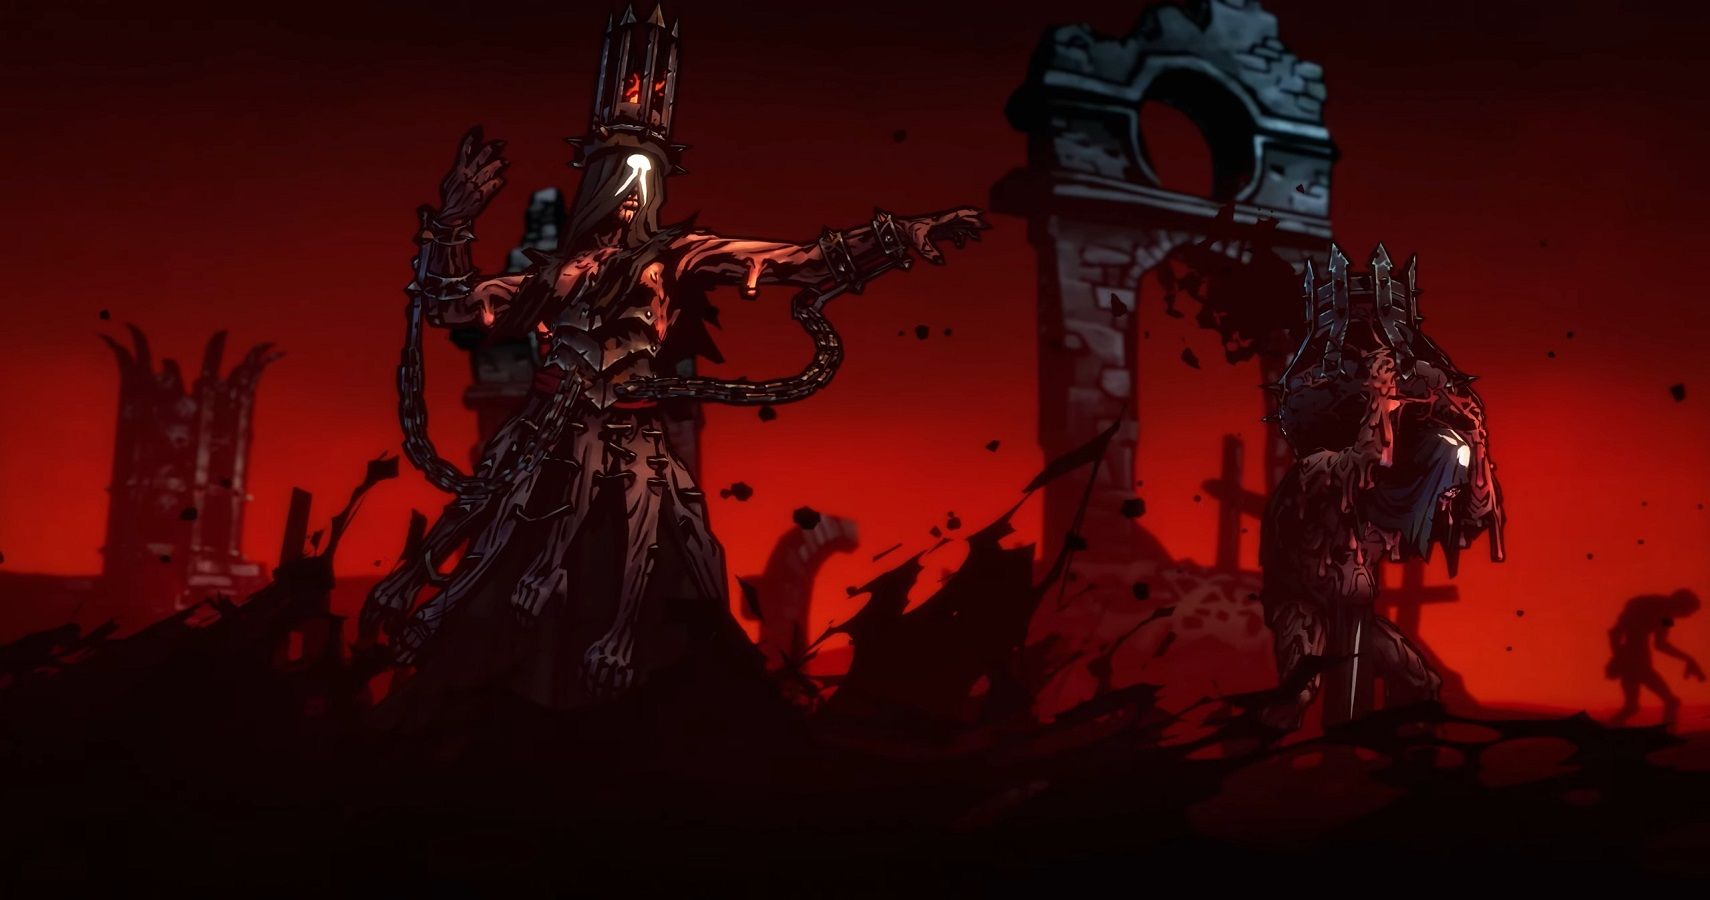 games like darkest dungeon and hollow knight